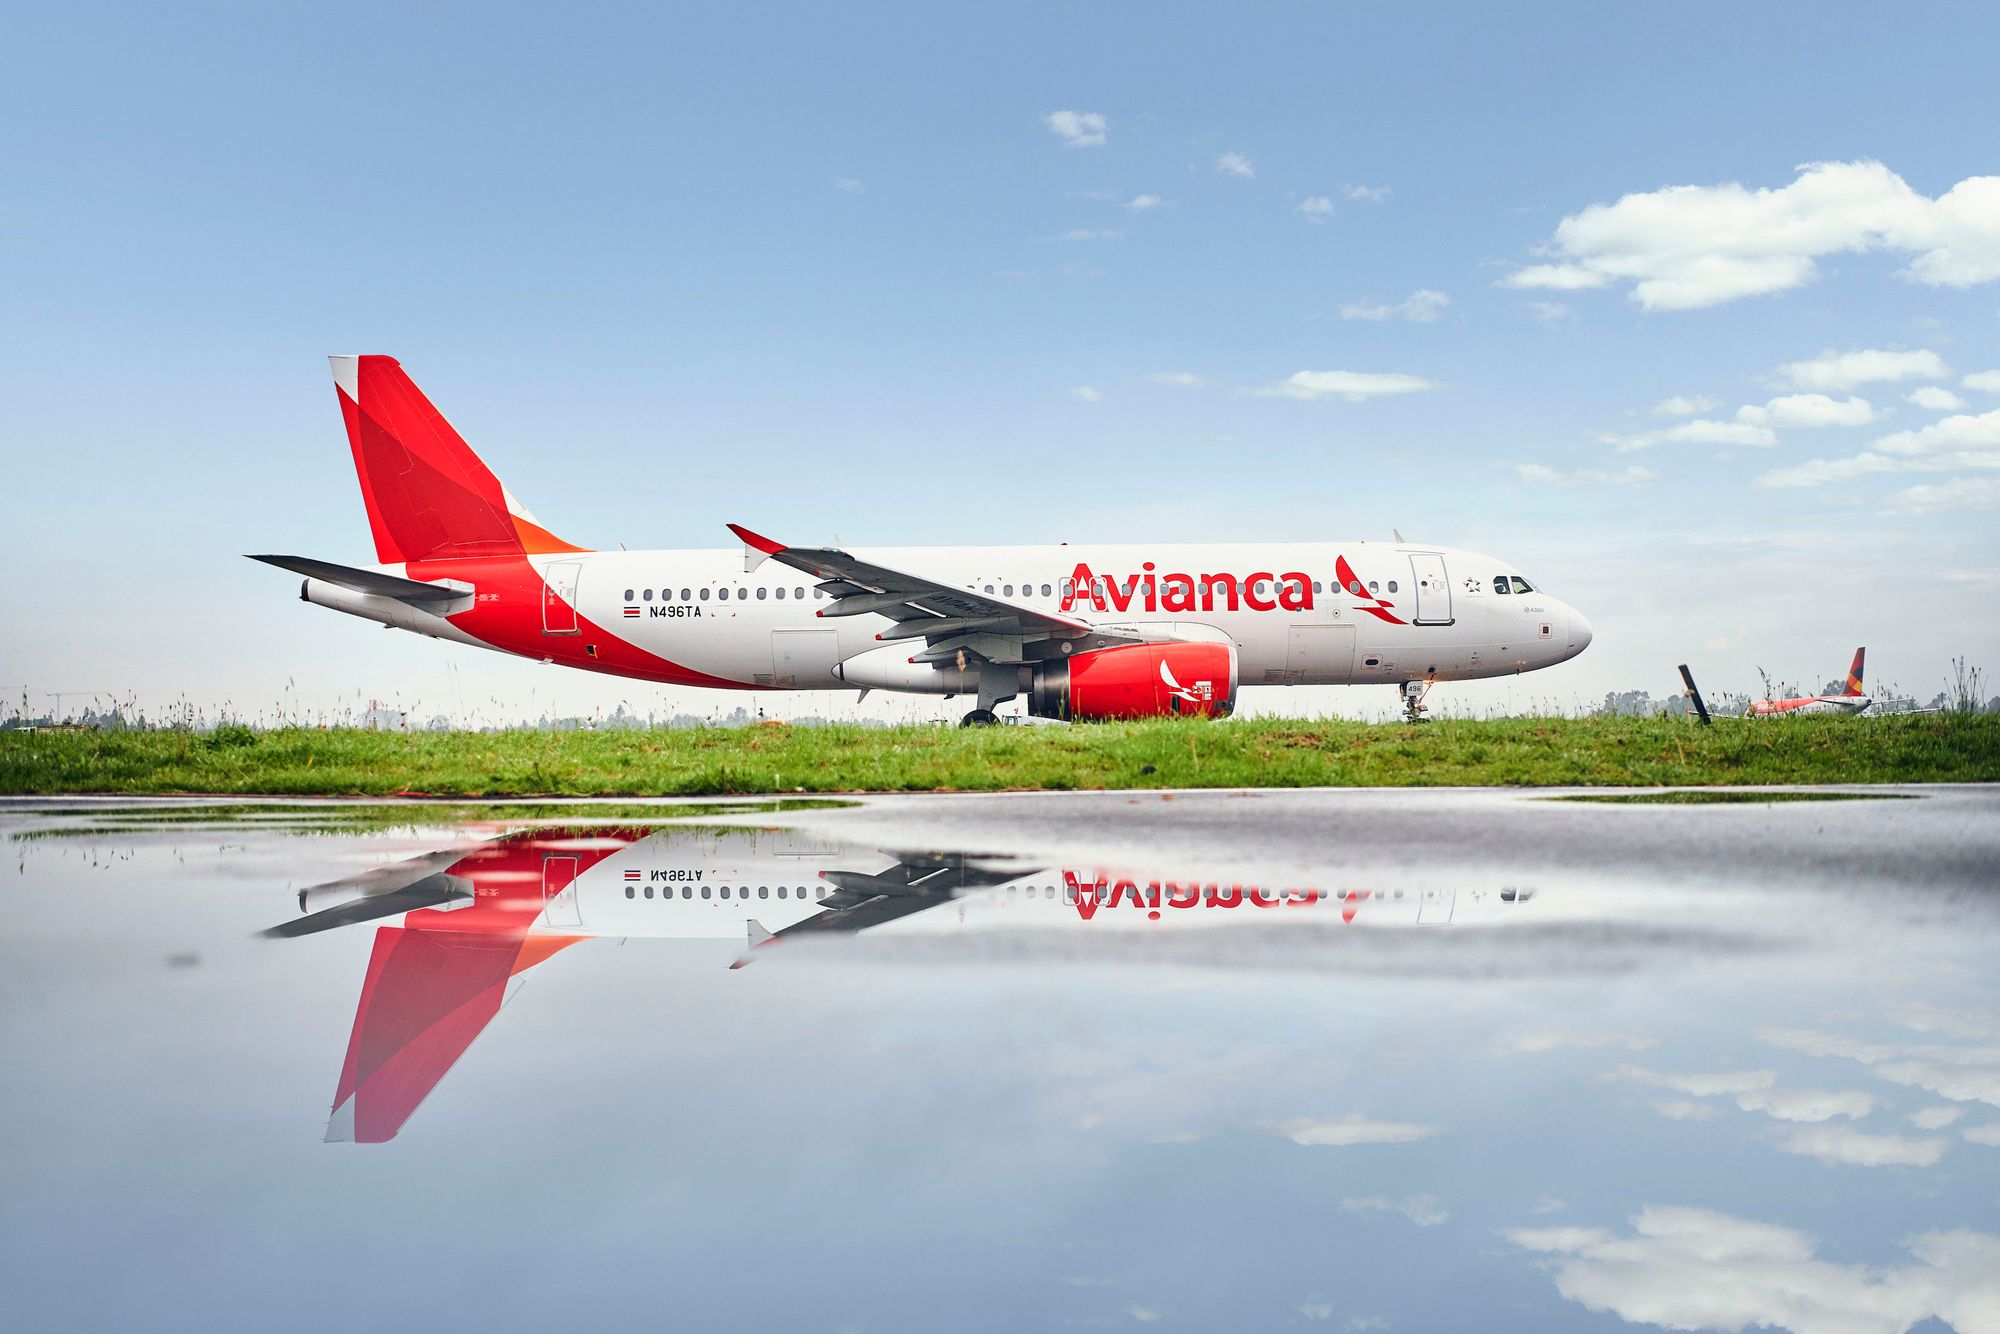 Avianca plane on an airport runway with it's reflection visible in a puddle